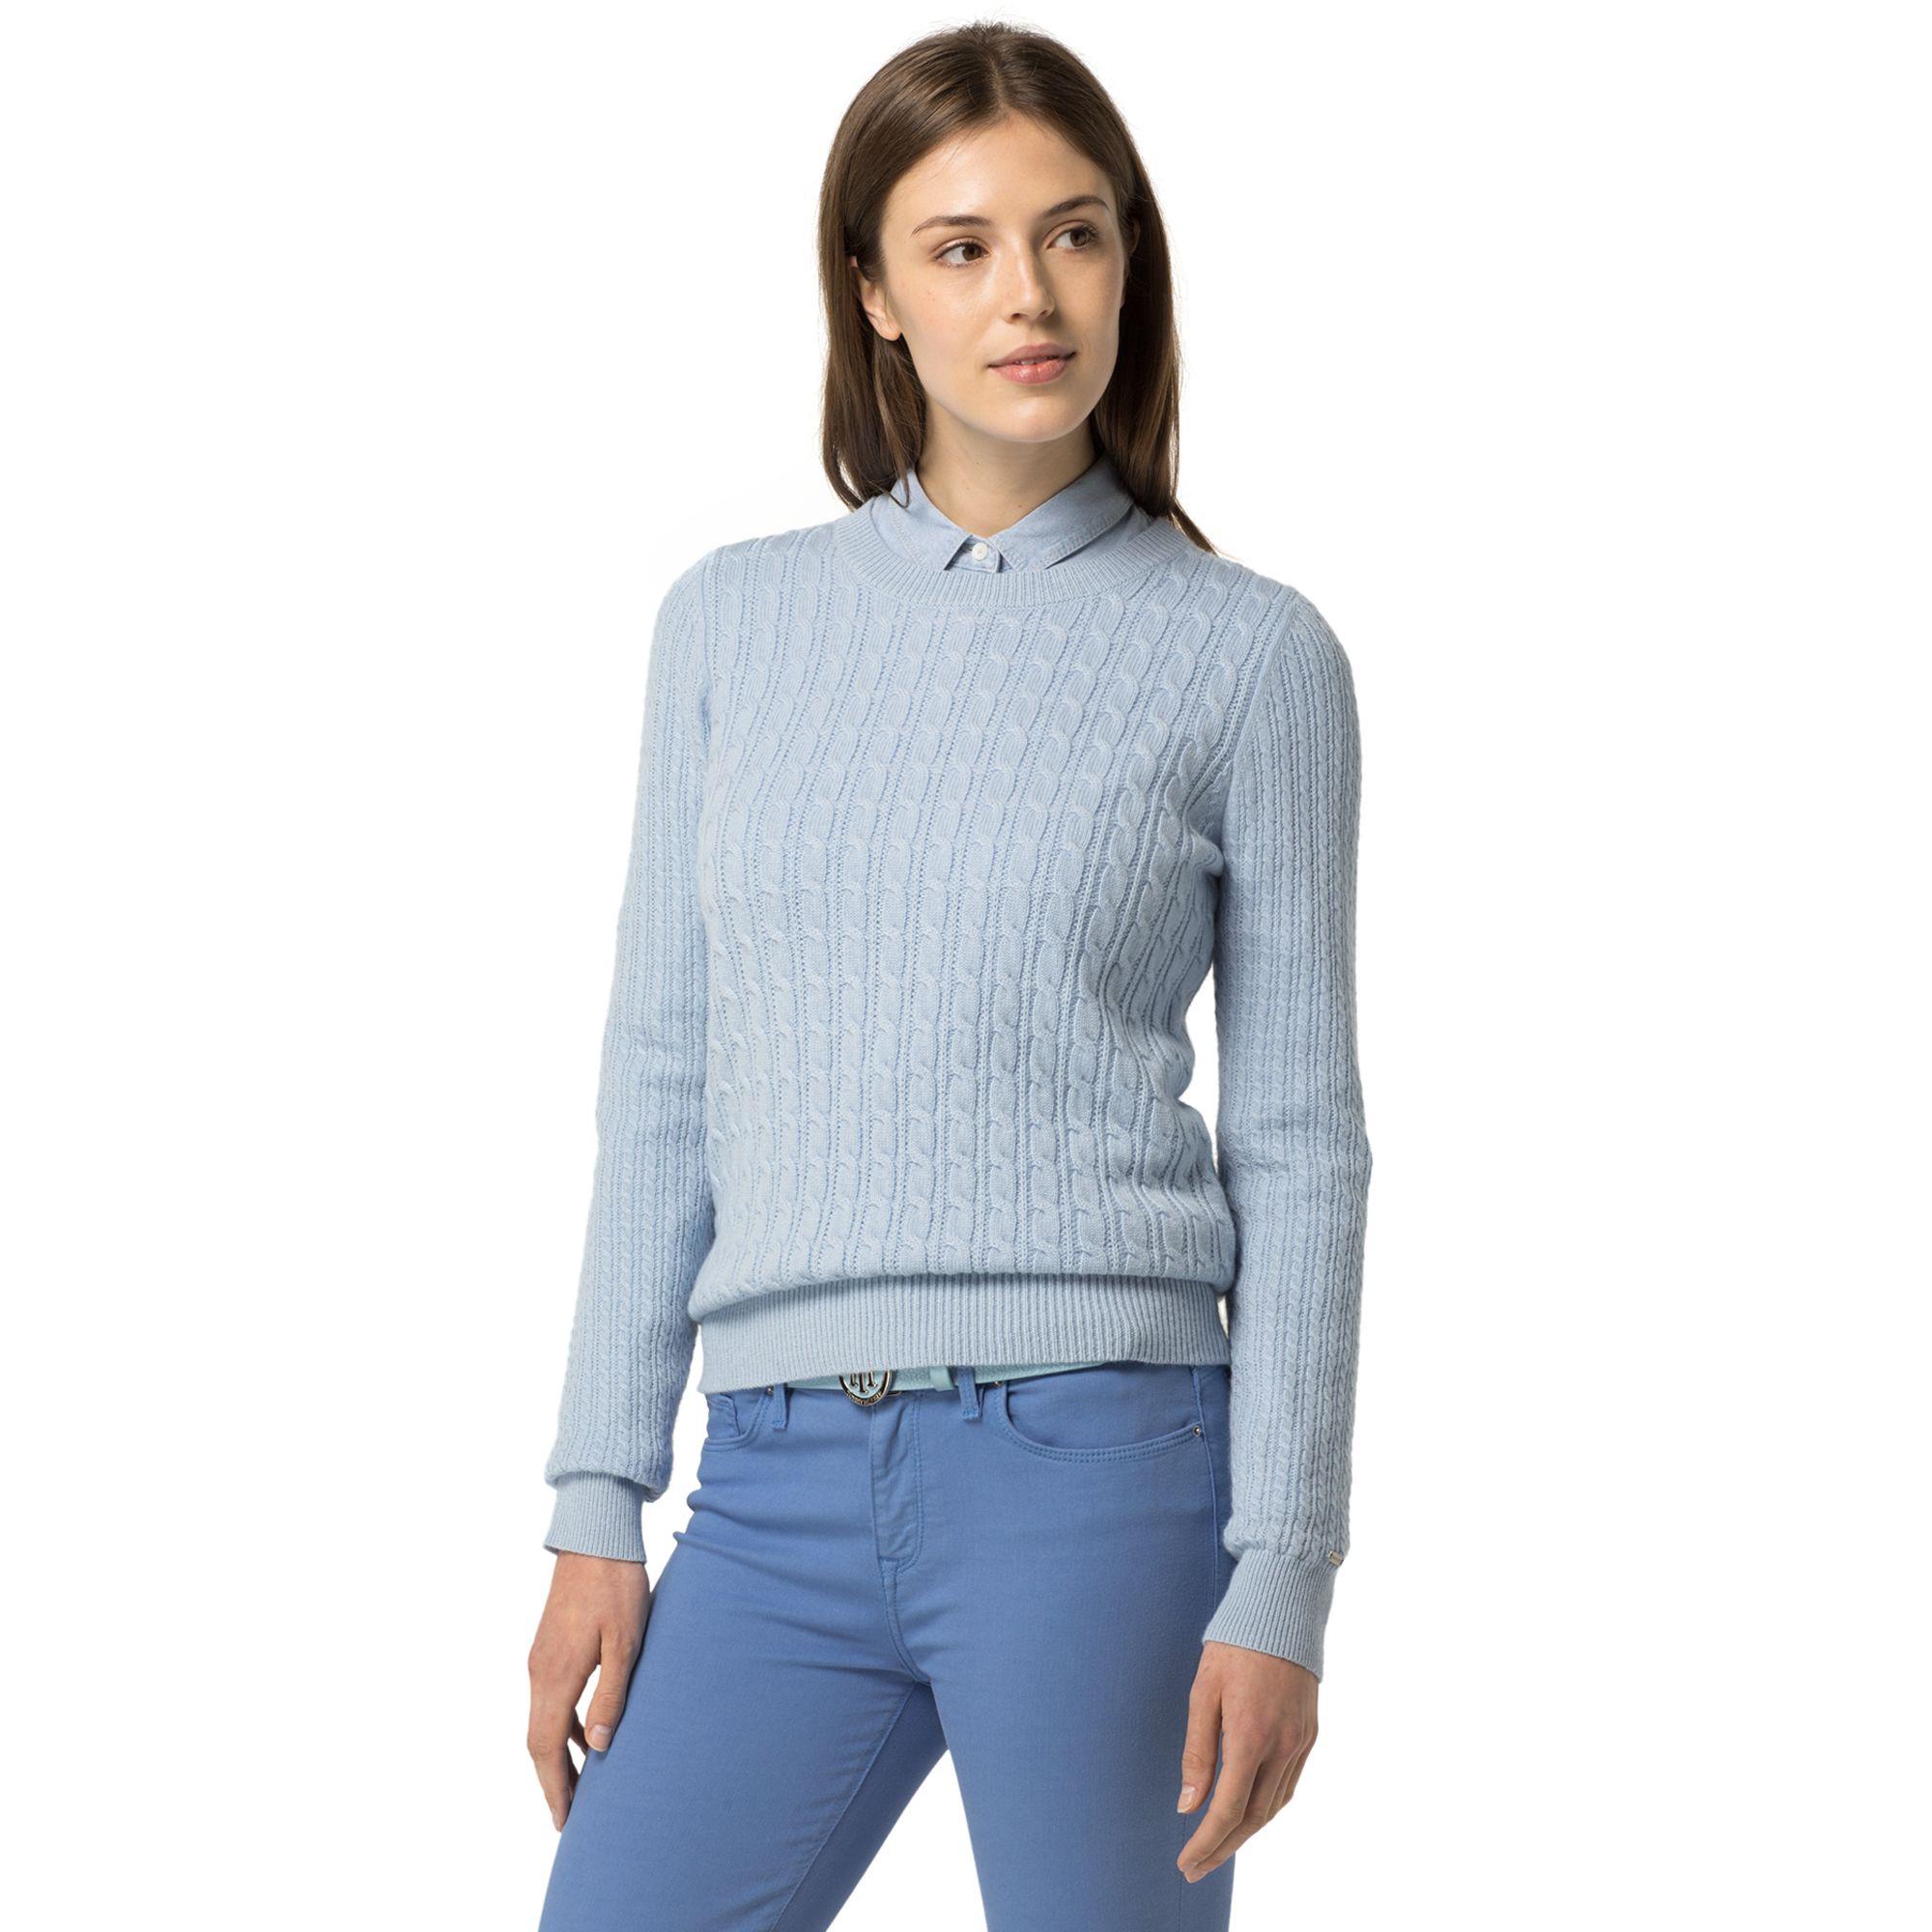 hilfiger cable knit sweater